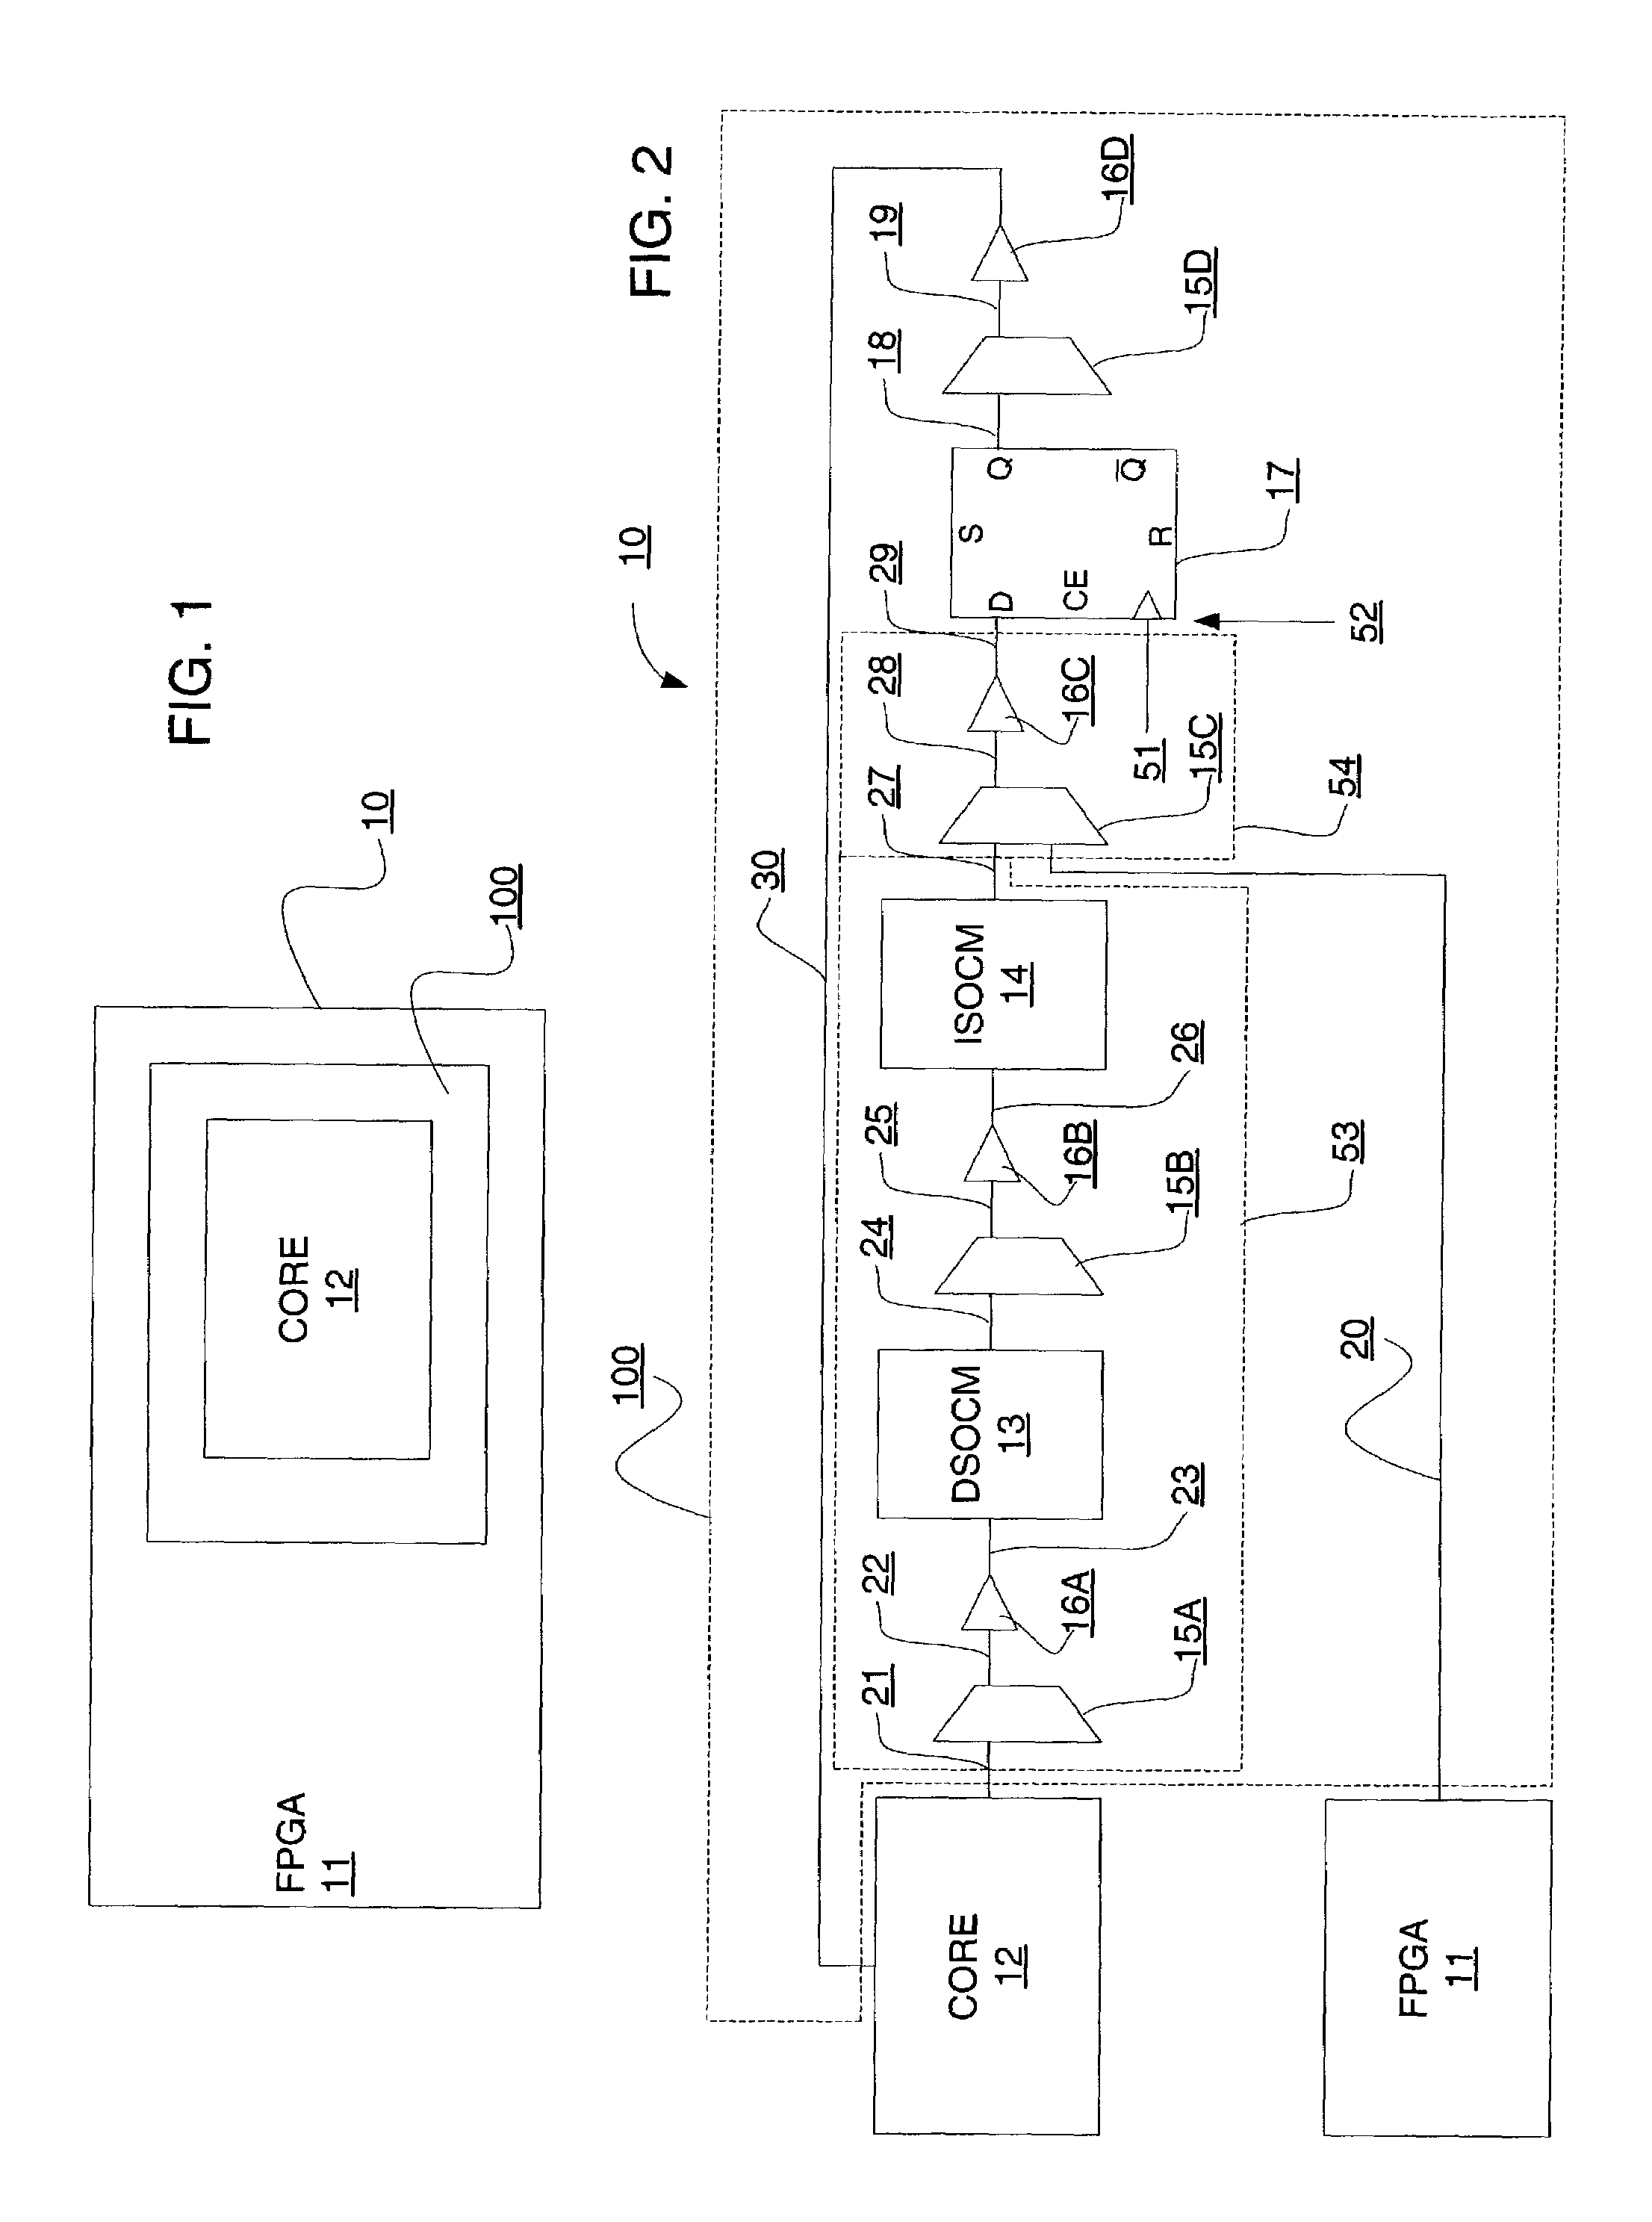 Method and apparatus for timing modeling